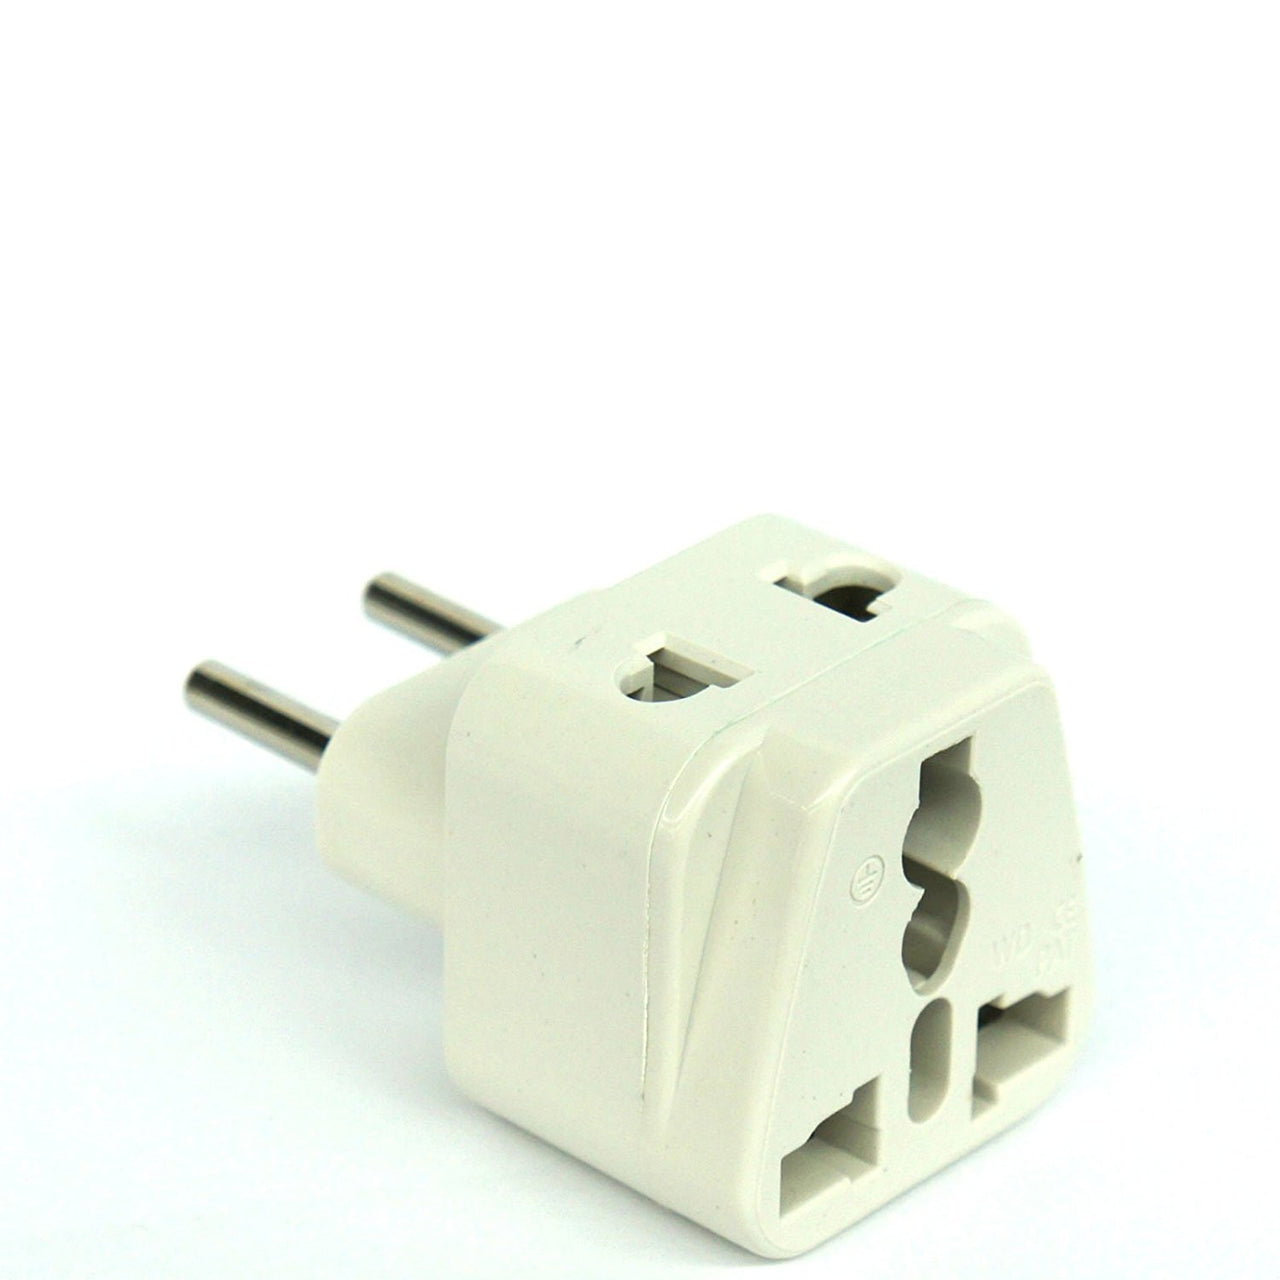 Large South African Conversion Plug Electrical Socket Plugs Two In One  Adapter 250v 10a Travel In India Chad Nepal Sri Lanka